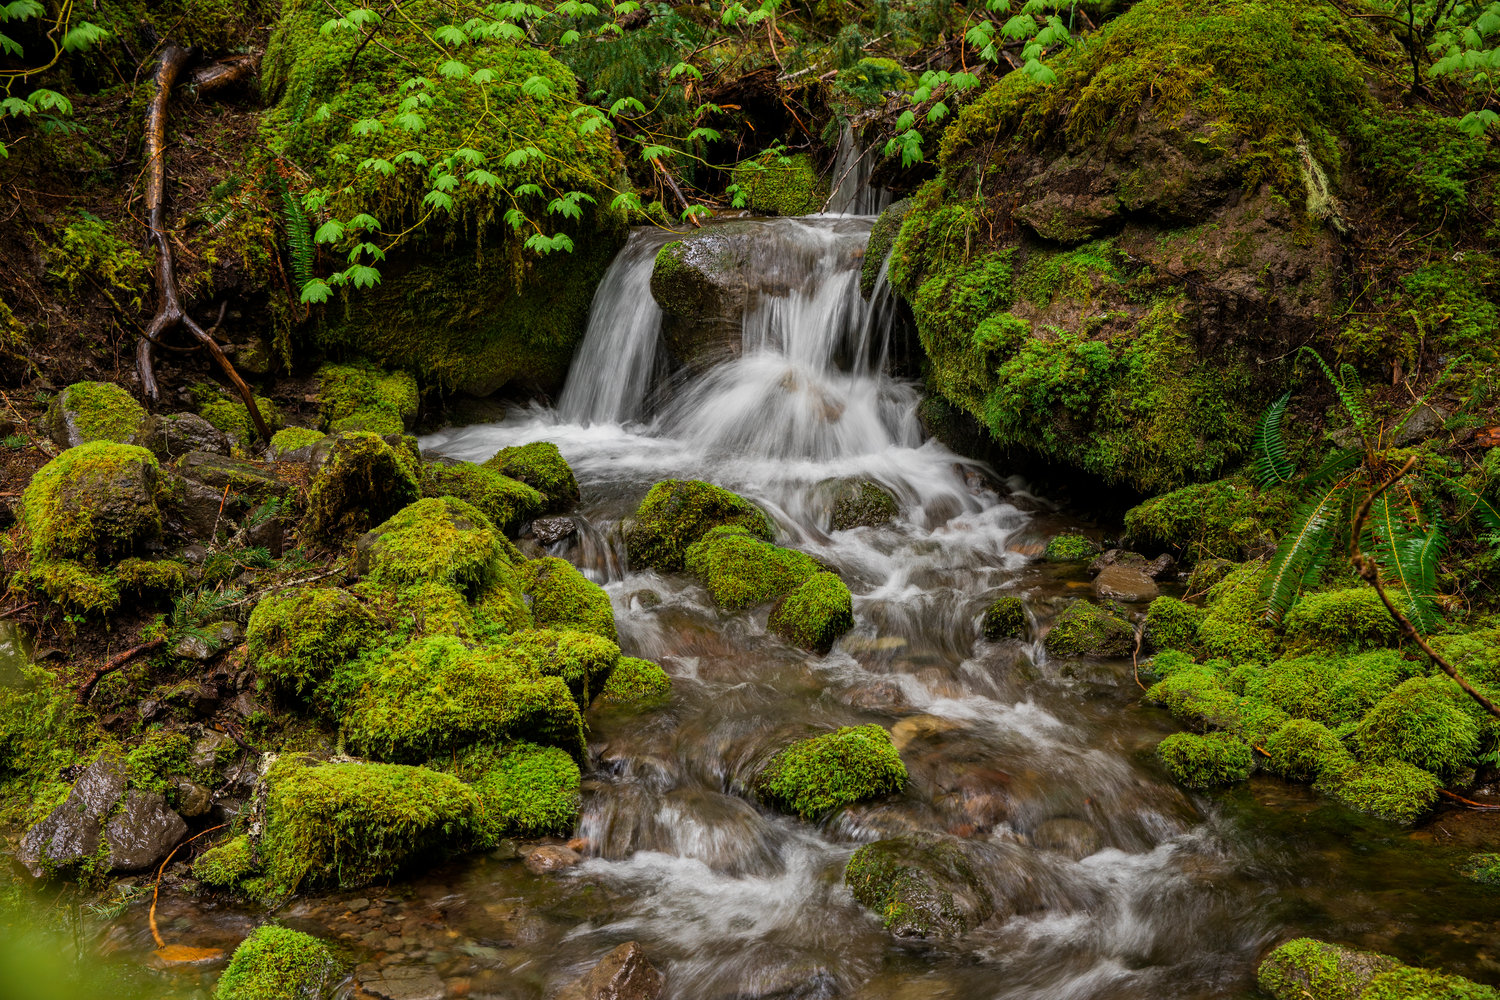 Water trickles down rocks along the Silver Falls Loop Trail in Mount Rainier National Park on Sunday, June 5, 2022.